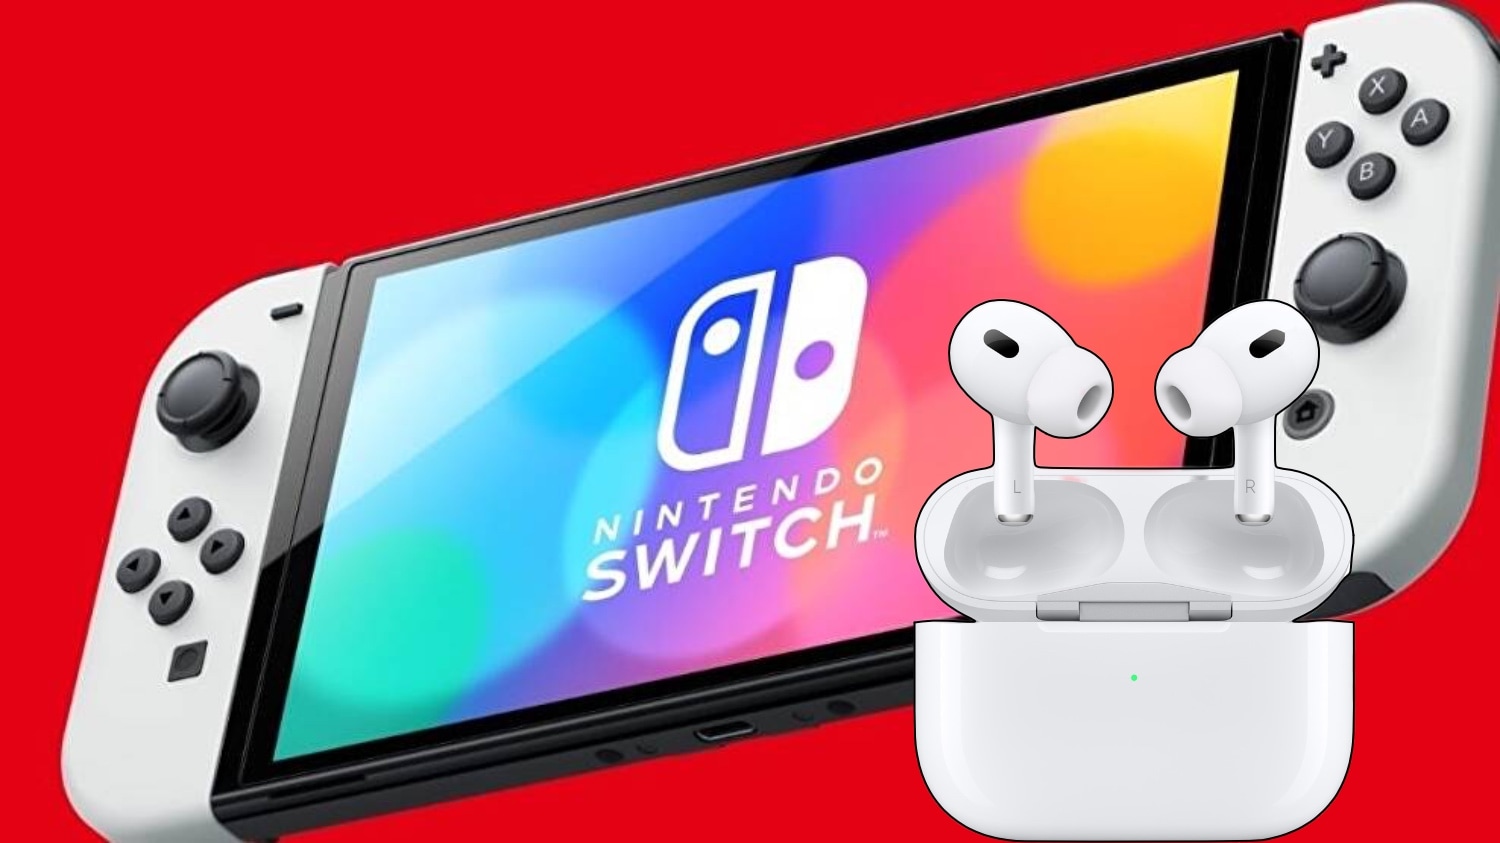 How to pair AirPods and other Bluetooth audio devices with Nintendo Switch